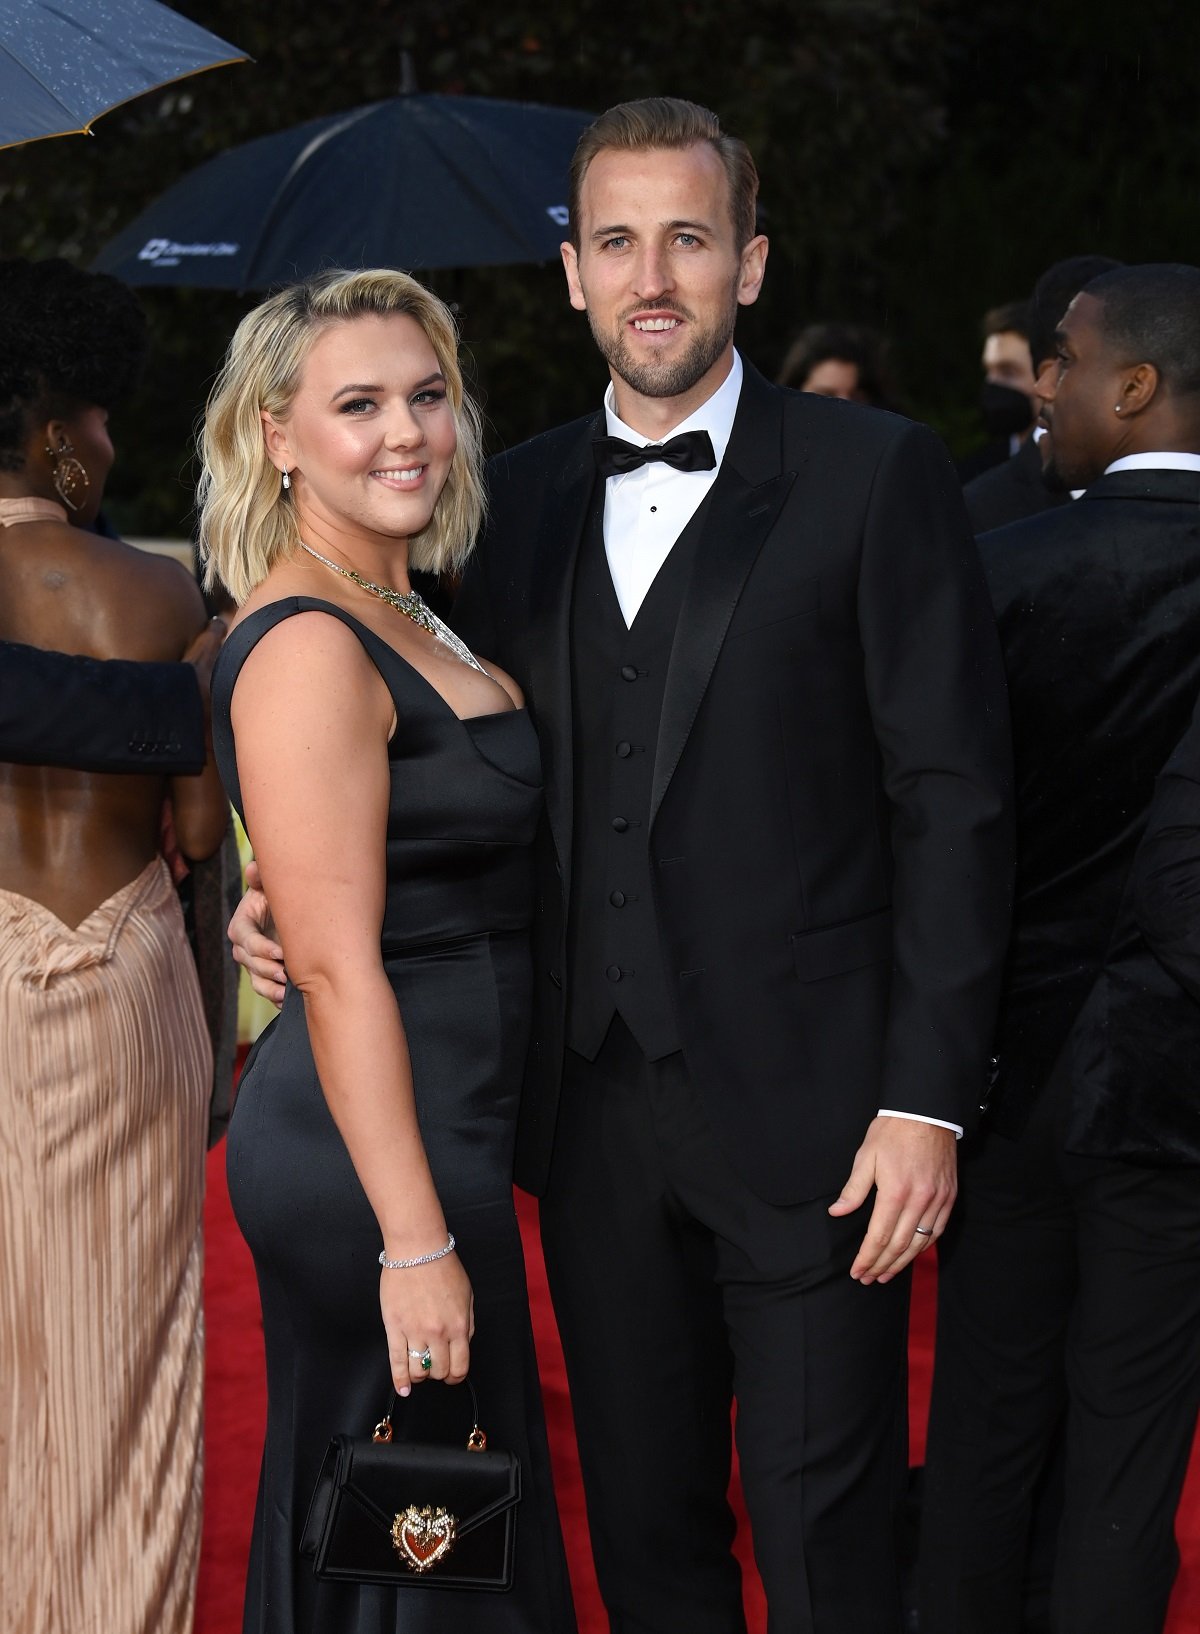 Harry Kane and Katie Goodland pose for photos at the No Time To Die world premiere